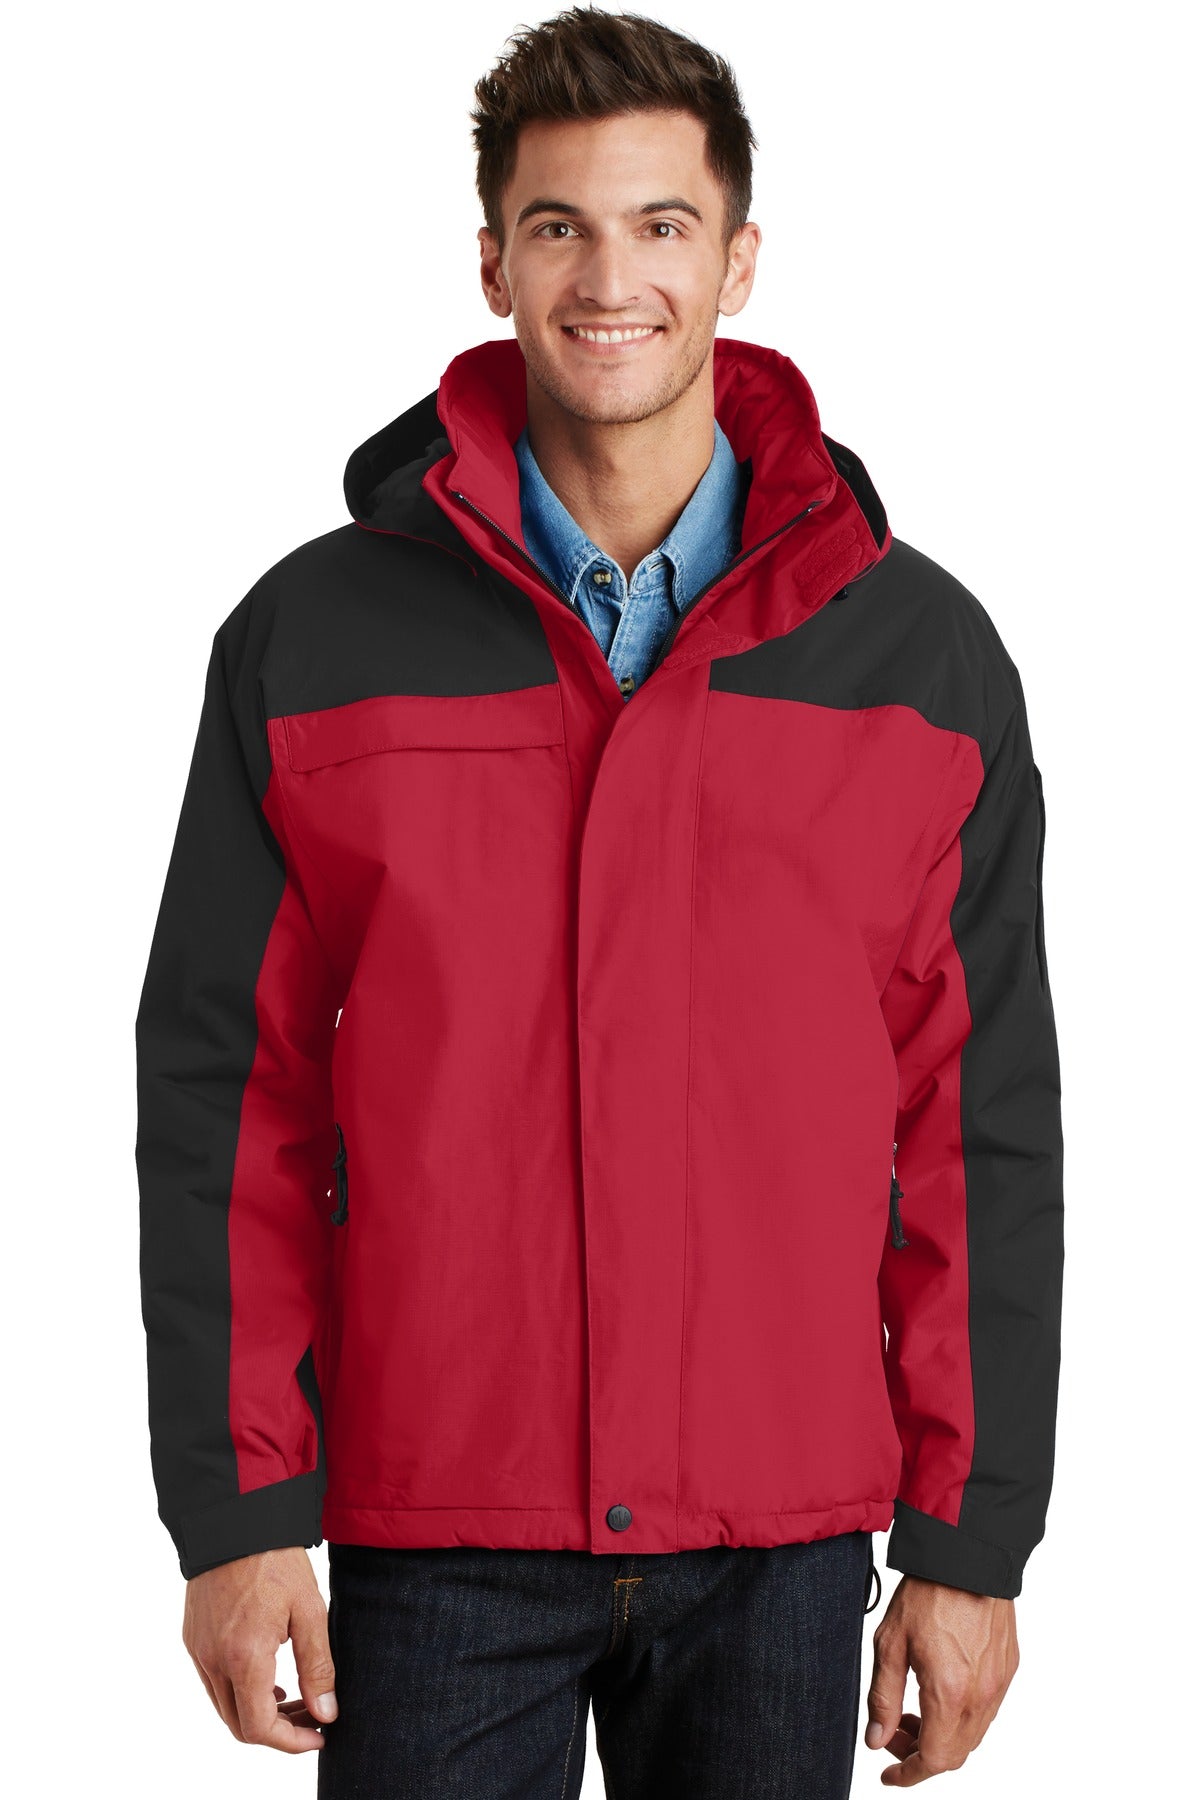 Outerwear Engine Red/ Black Port Authority